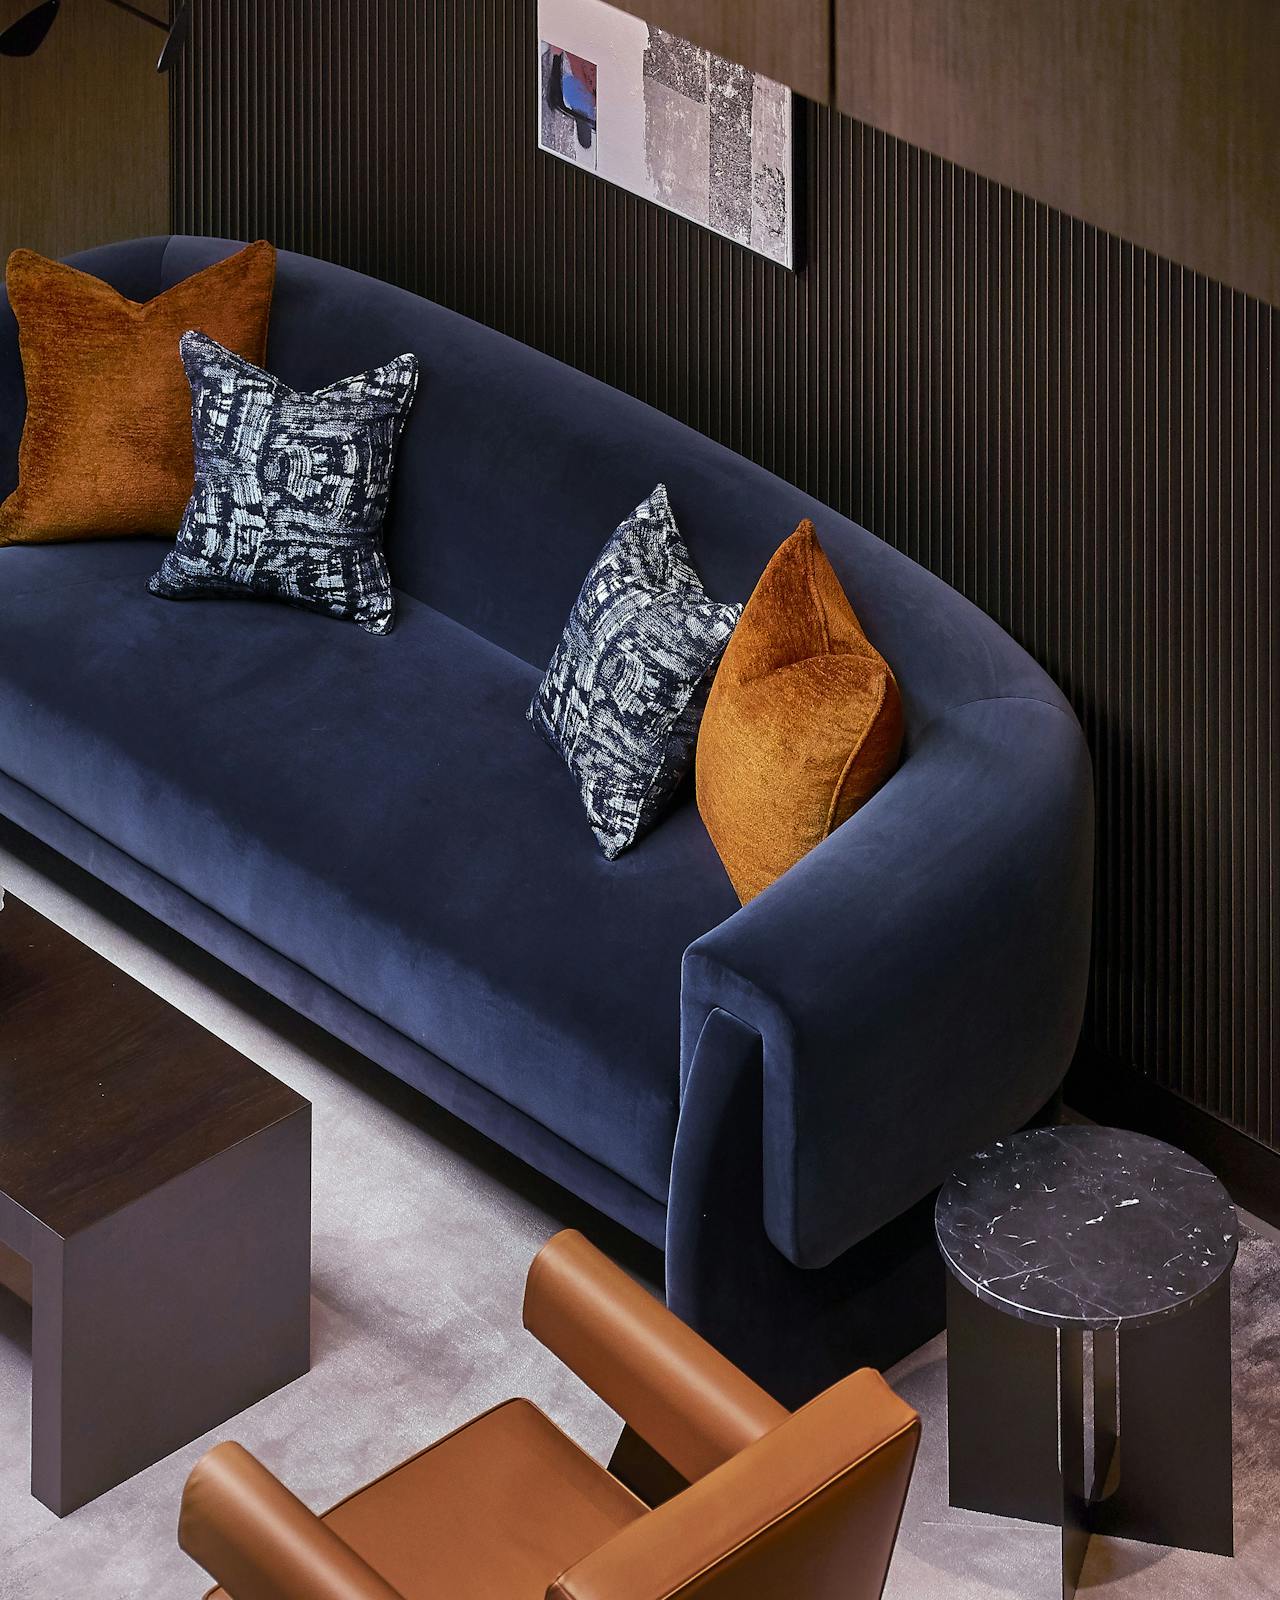 warm fabrics used in this comfortable sofa & its cushions